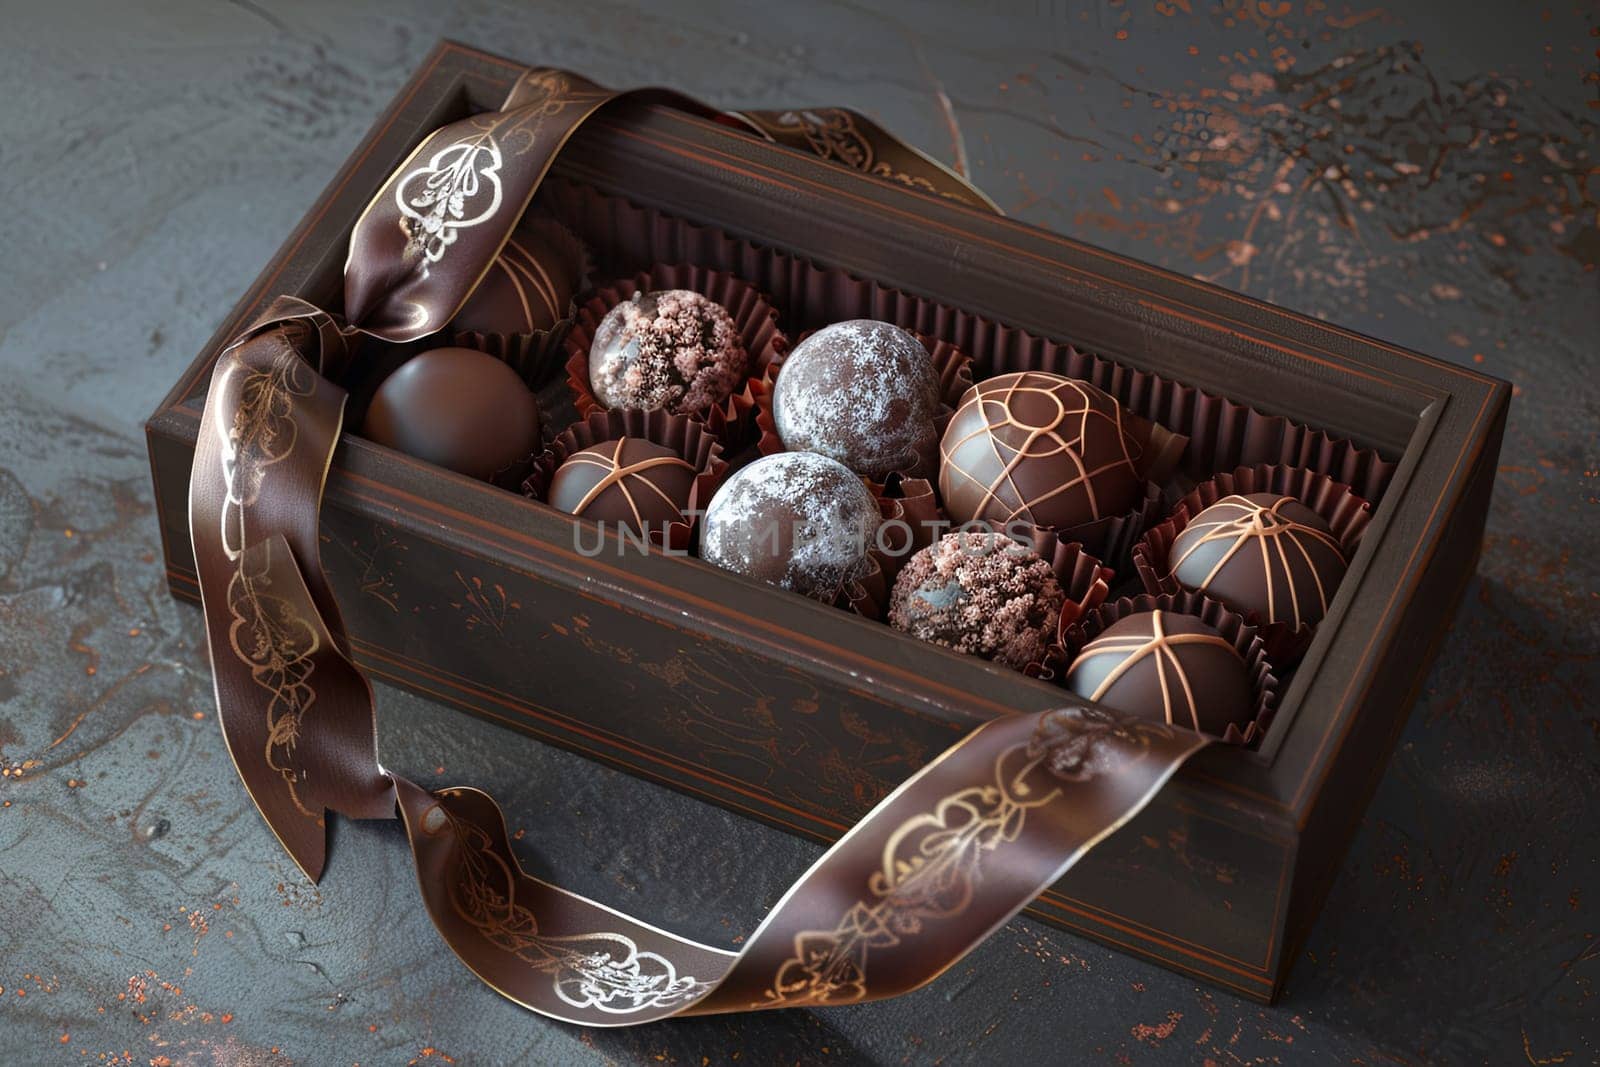 A luxurious wooden box filled with rich dark chocolates, adorned with ribbons, placed on a table.